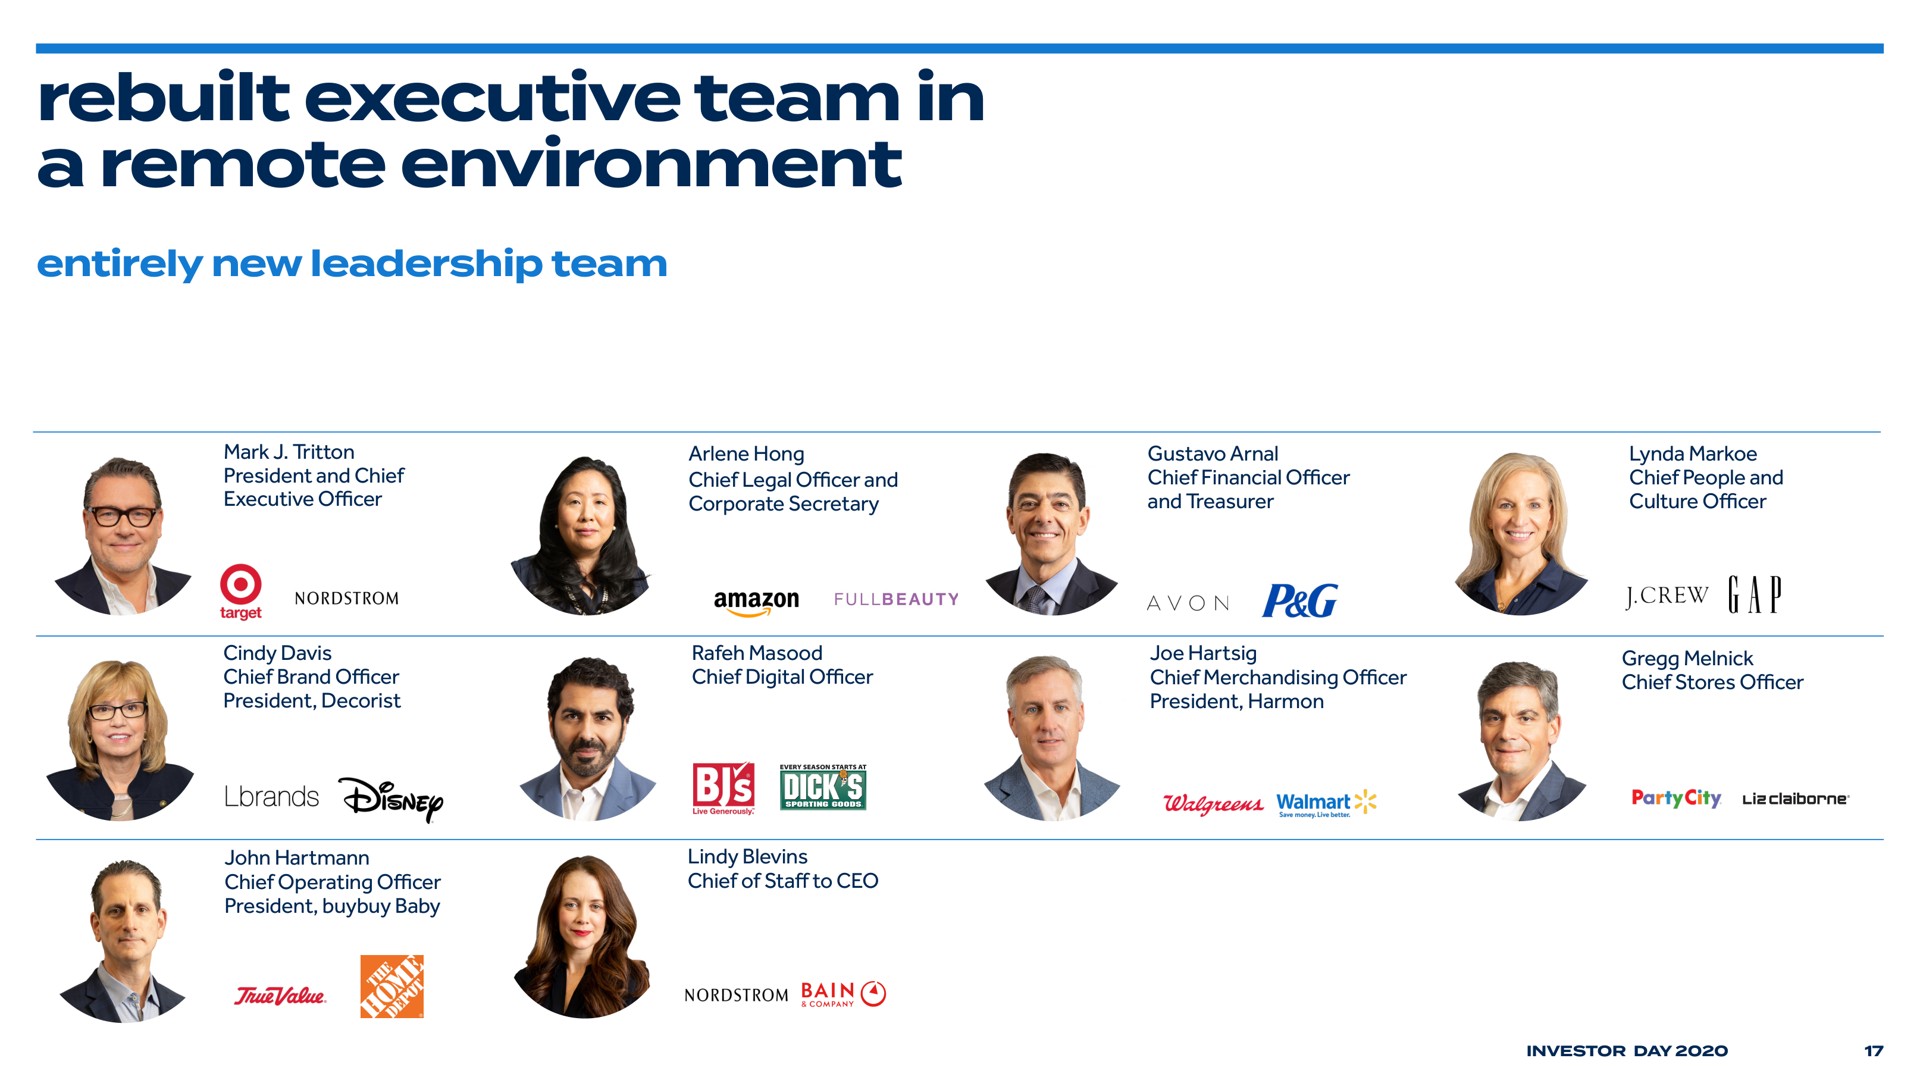 rebuilt executive team in a remote environment | Bed Bath & Beyond